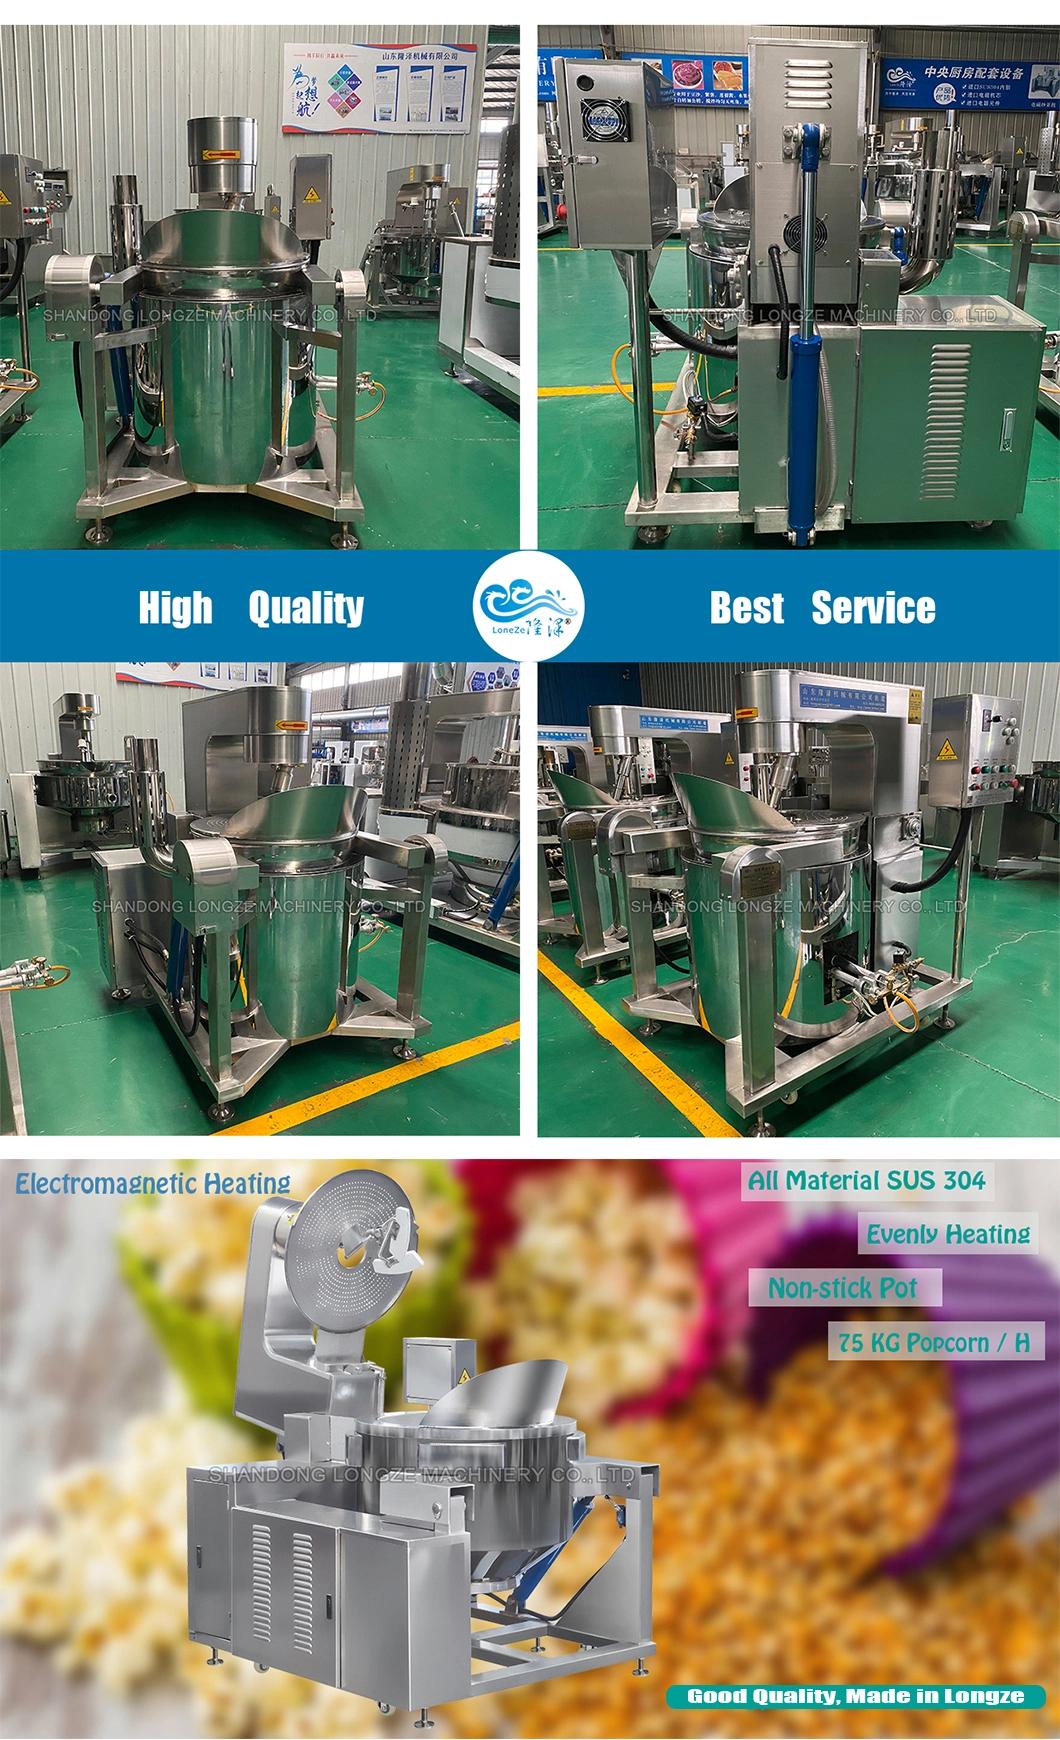 Cheap Price Good Quality Automatic Commercial Big Caramel Popcorn Machine for Sale